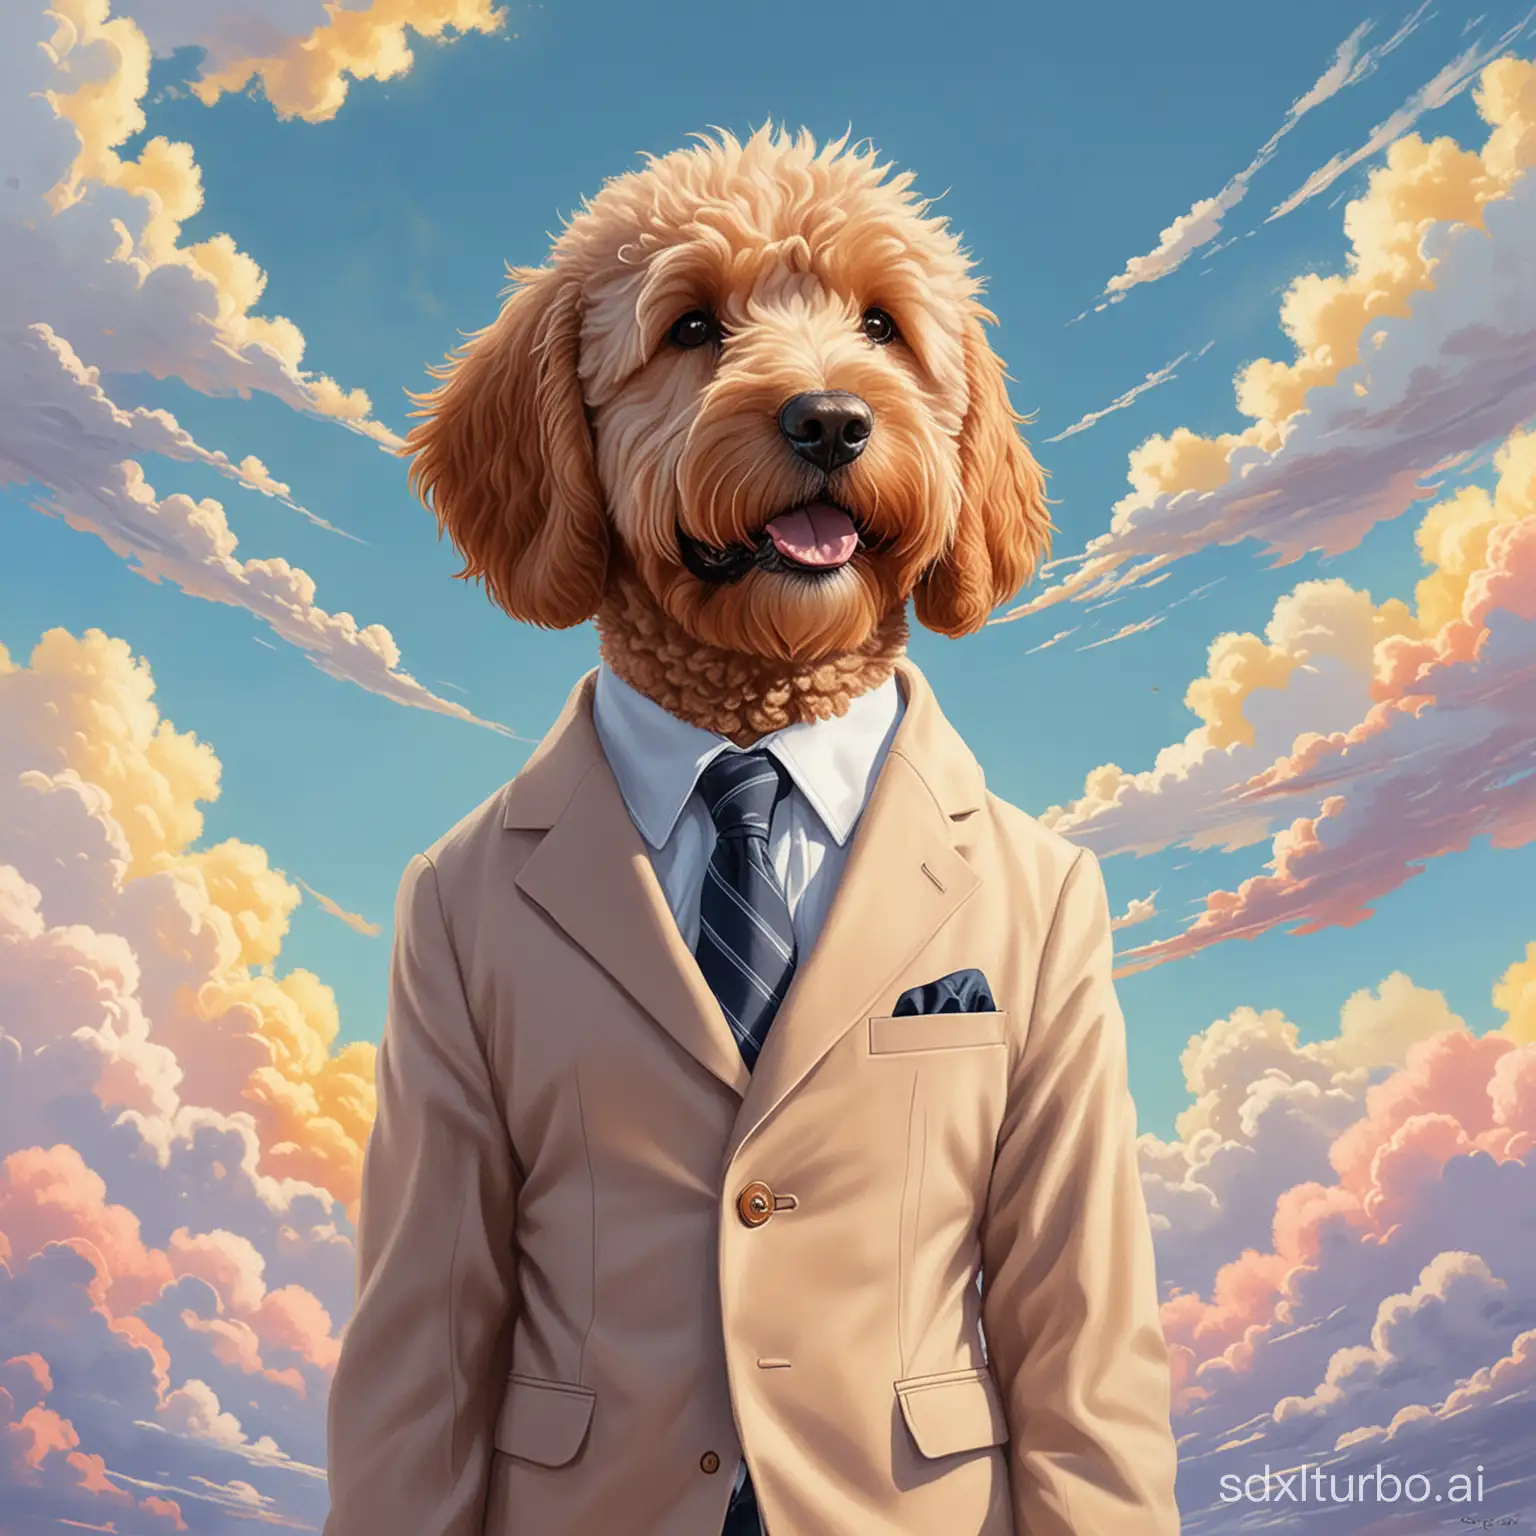 A painting of a cute goldendoodle wearing a suit,natural light,in the sky,with bright color5,by Studio Ghibli